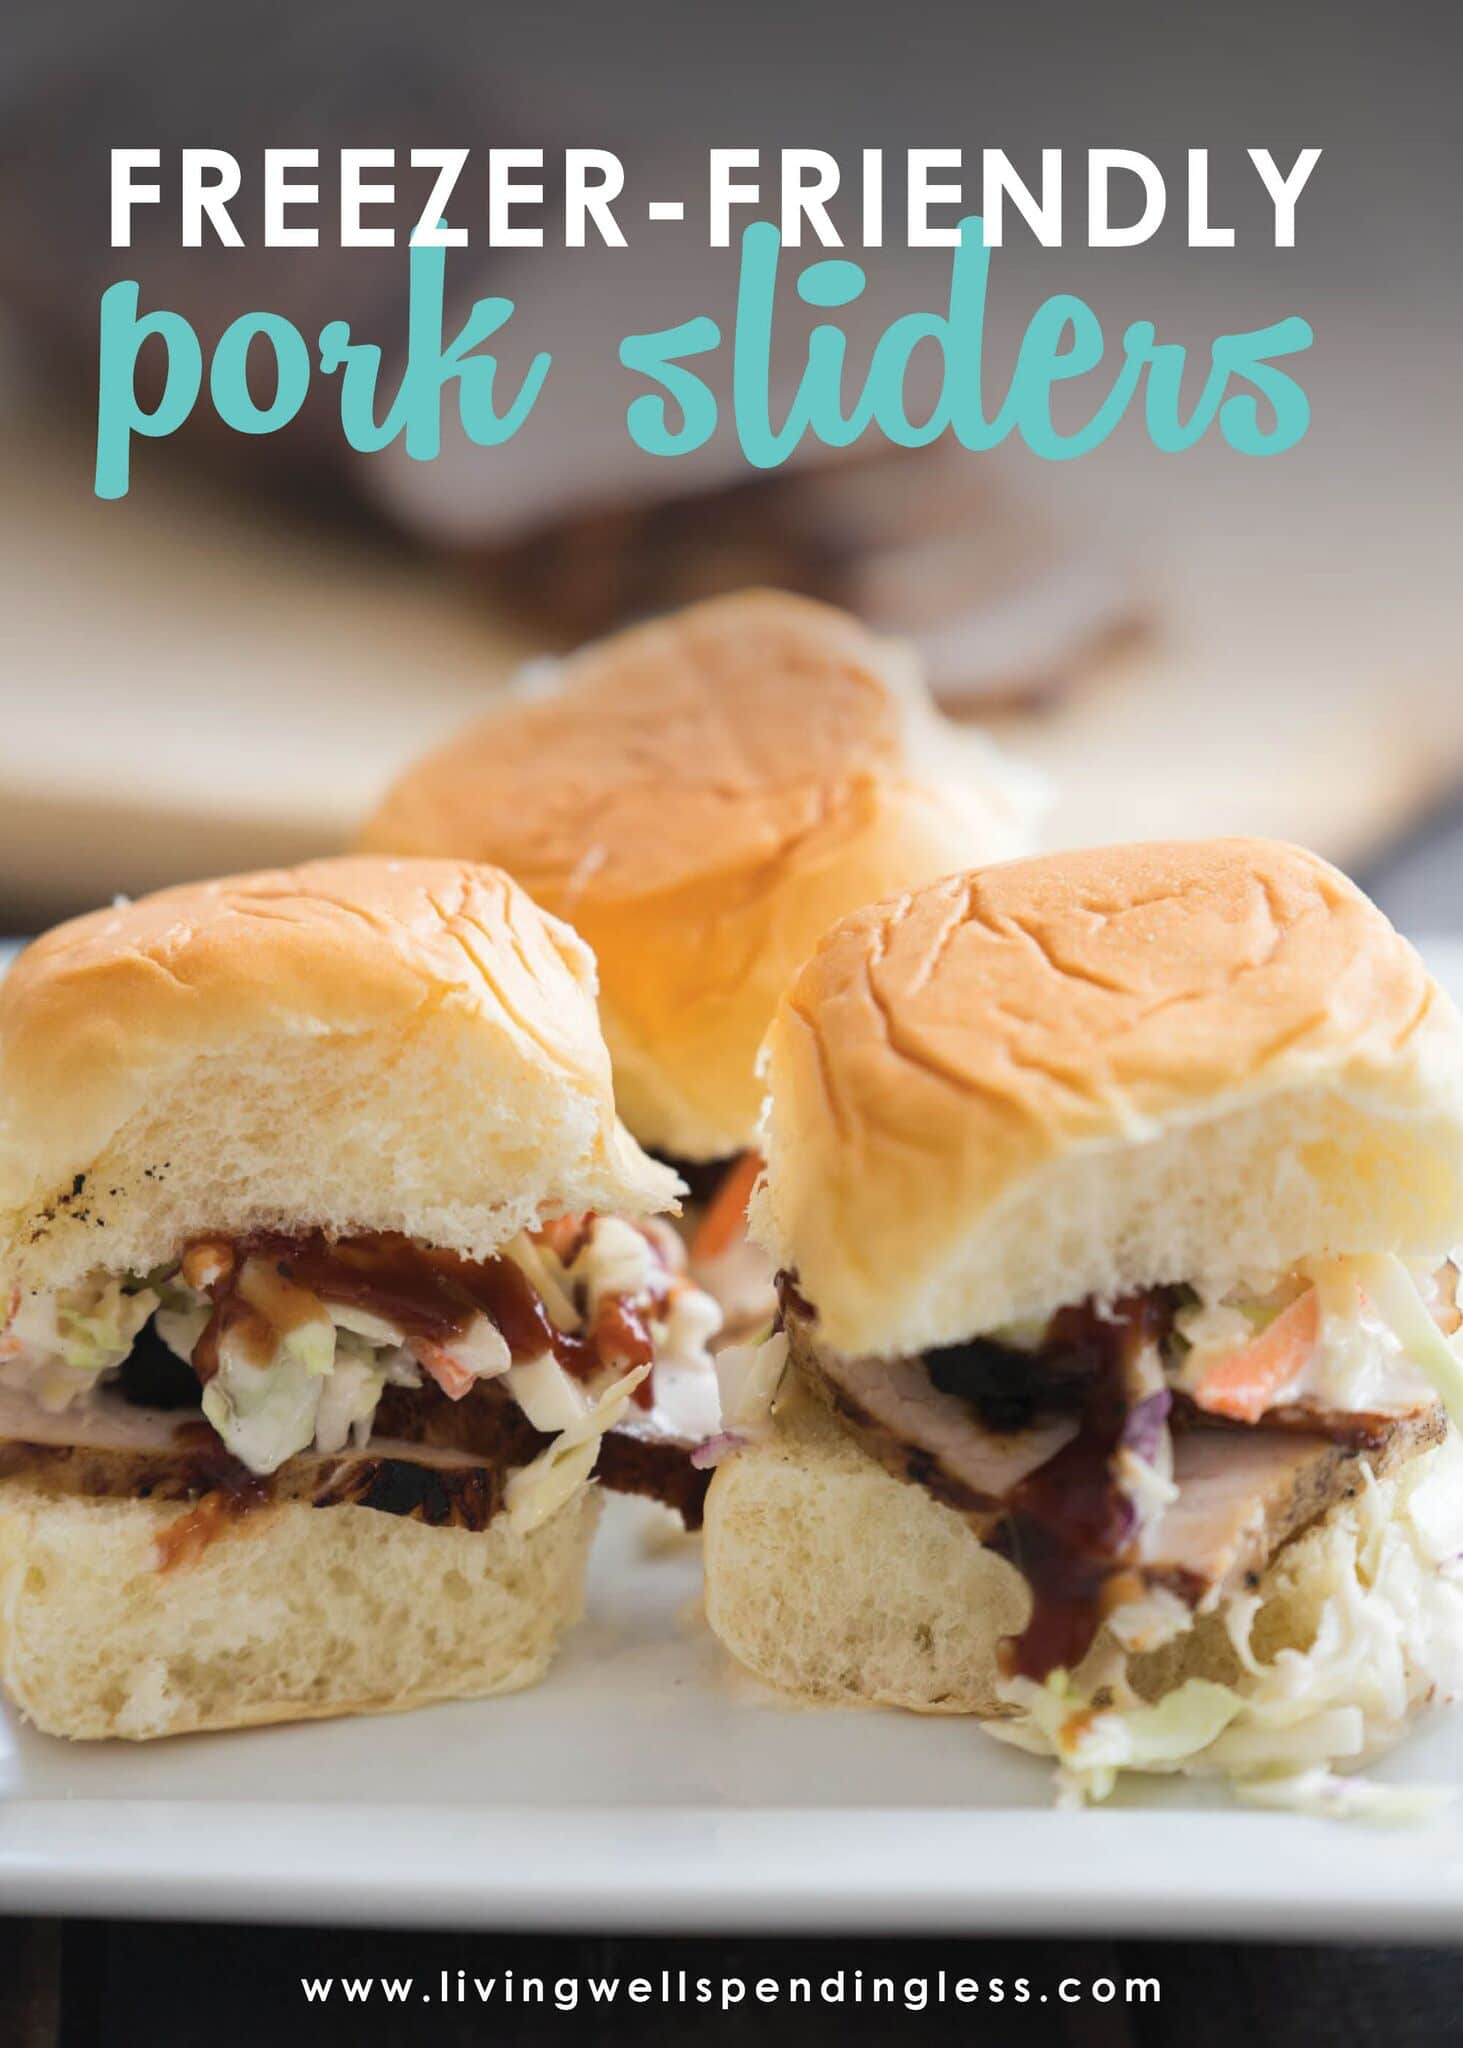 Pork Sliders with Slaw ⎢ Freezer Friendly Dinner Recipe ⎢ 10 Meals in an Hour ⎢ Food Made Simple ⎢ Family Dinner